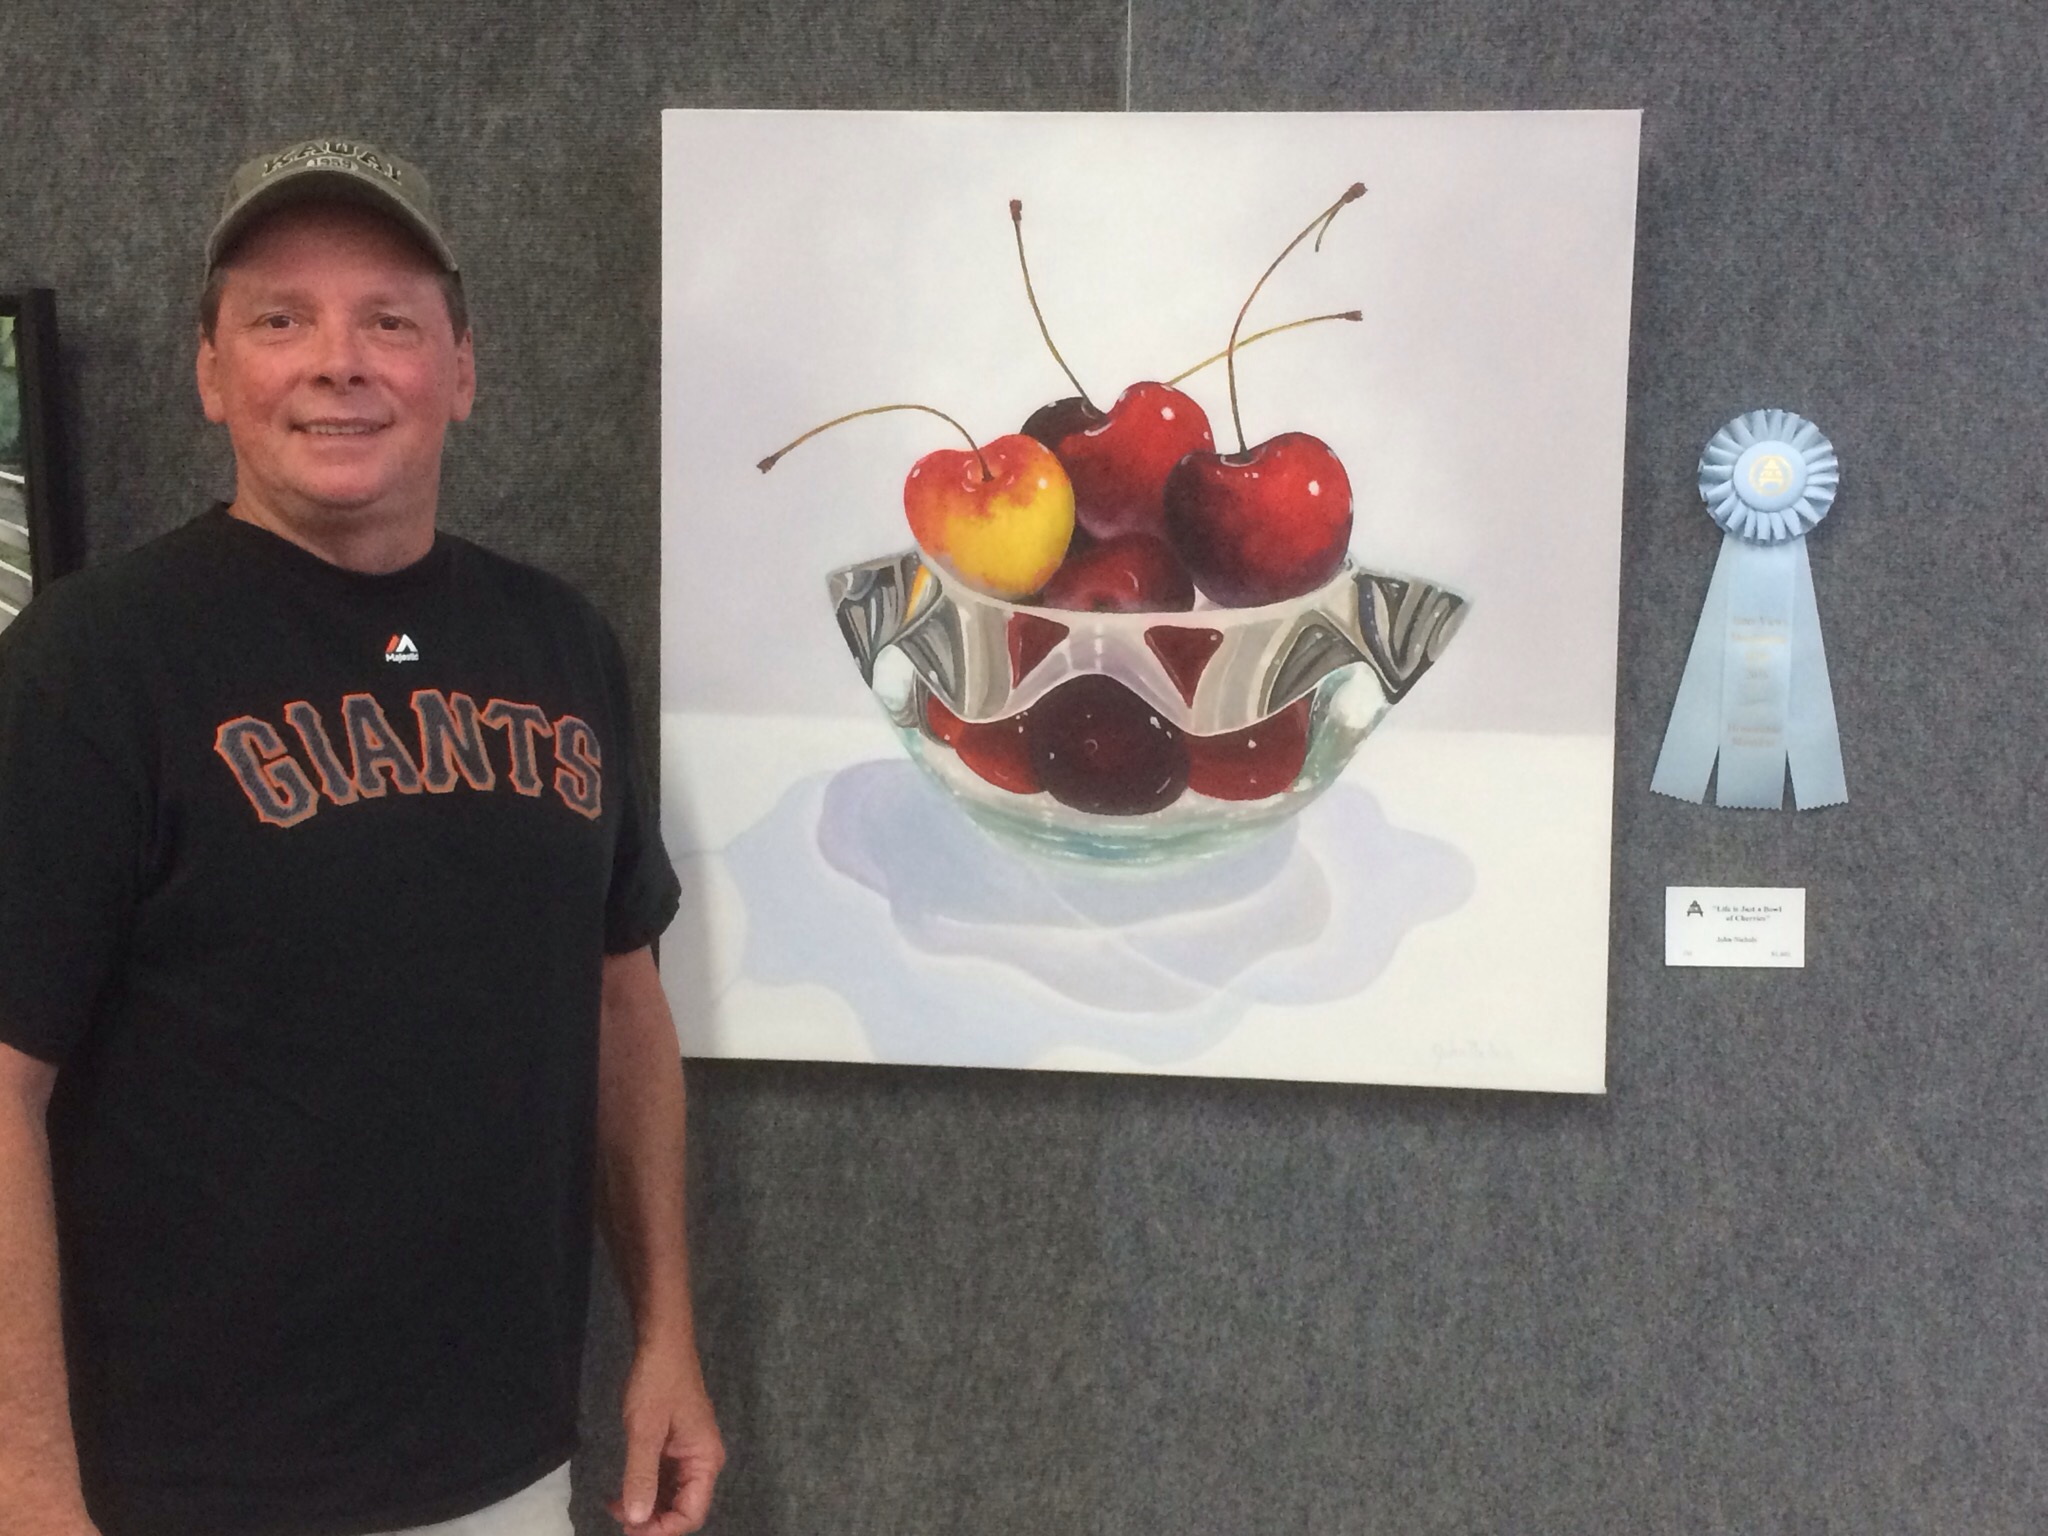 Sacramento Fine Arts Center, "People's Choice" and "Honorable Mention"